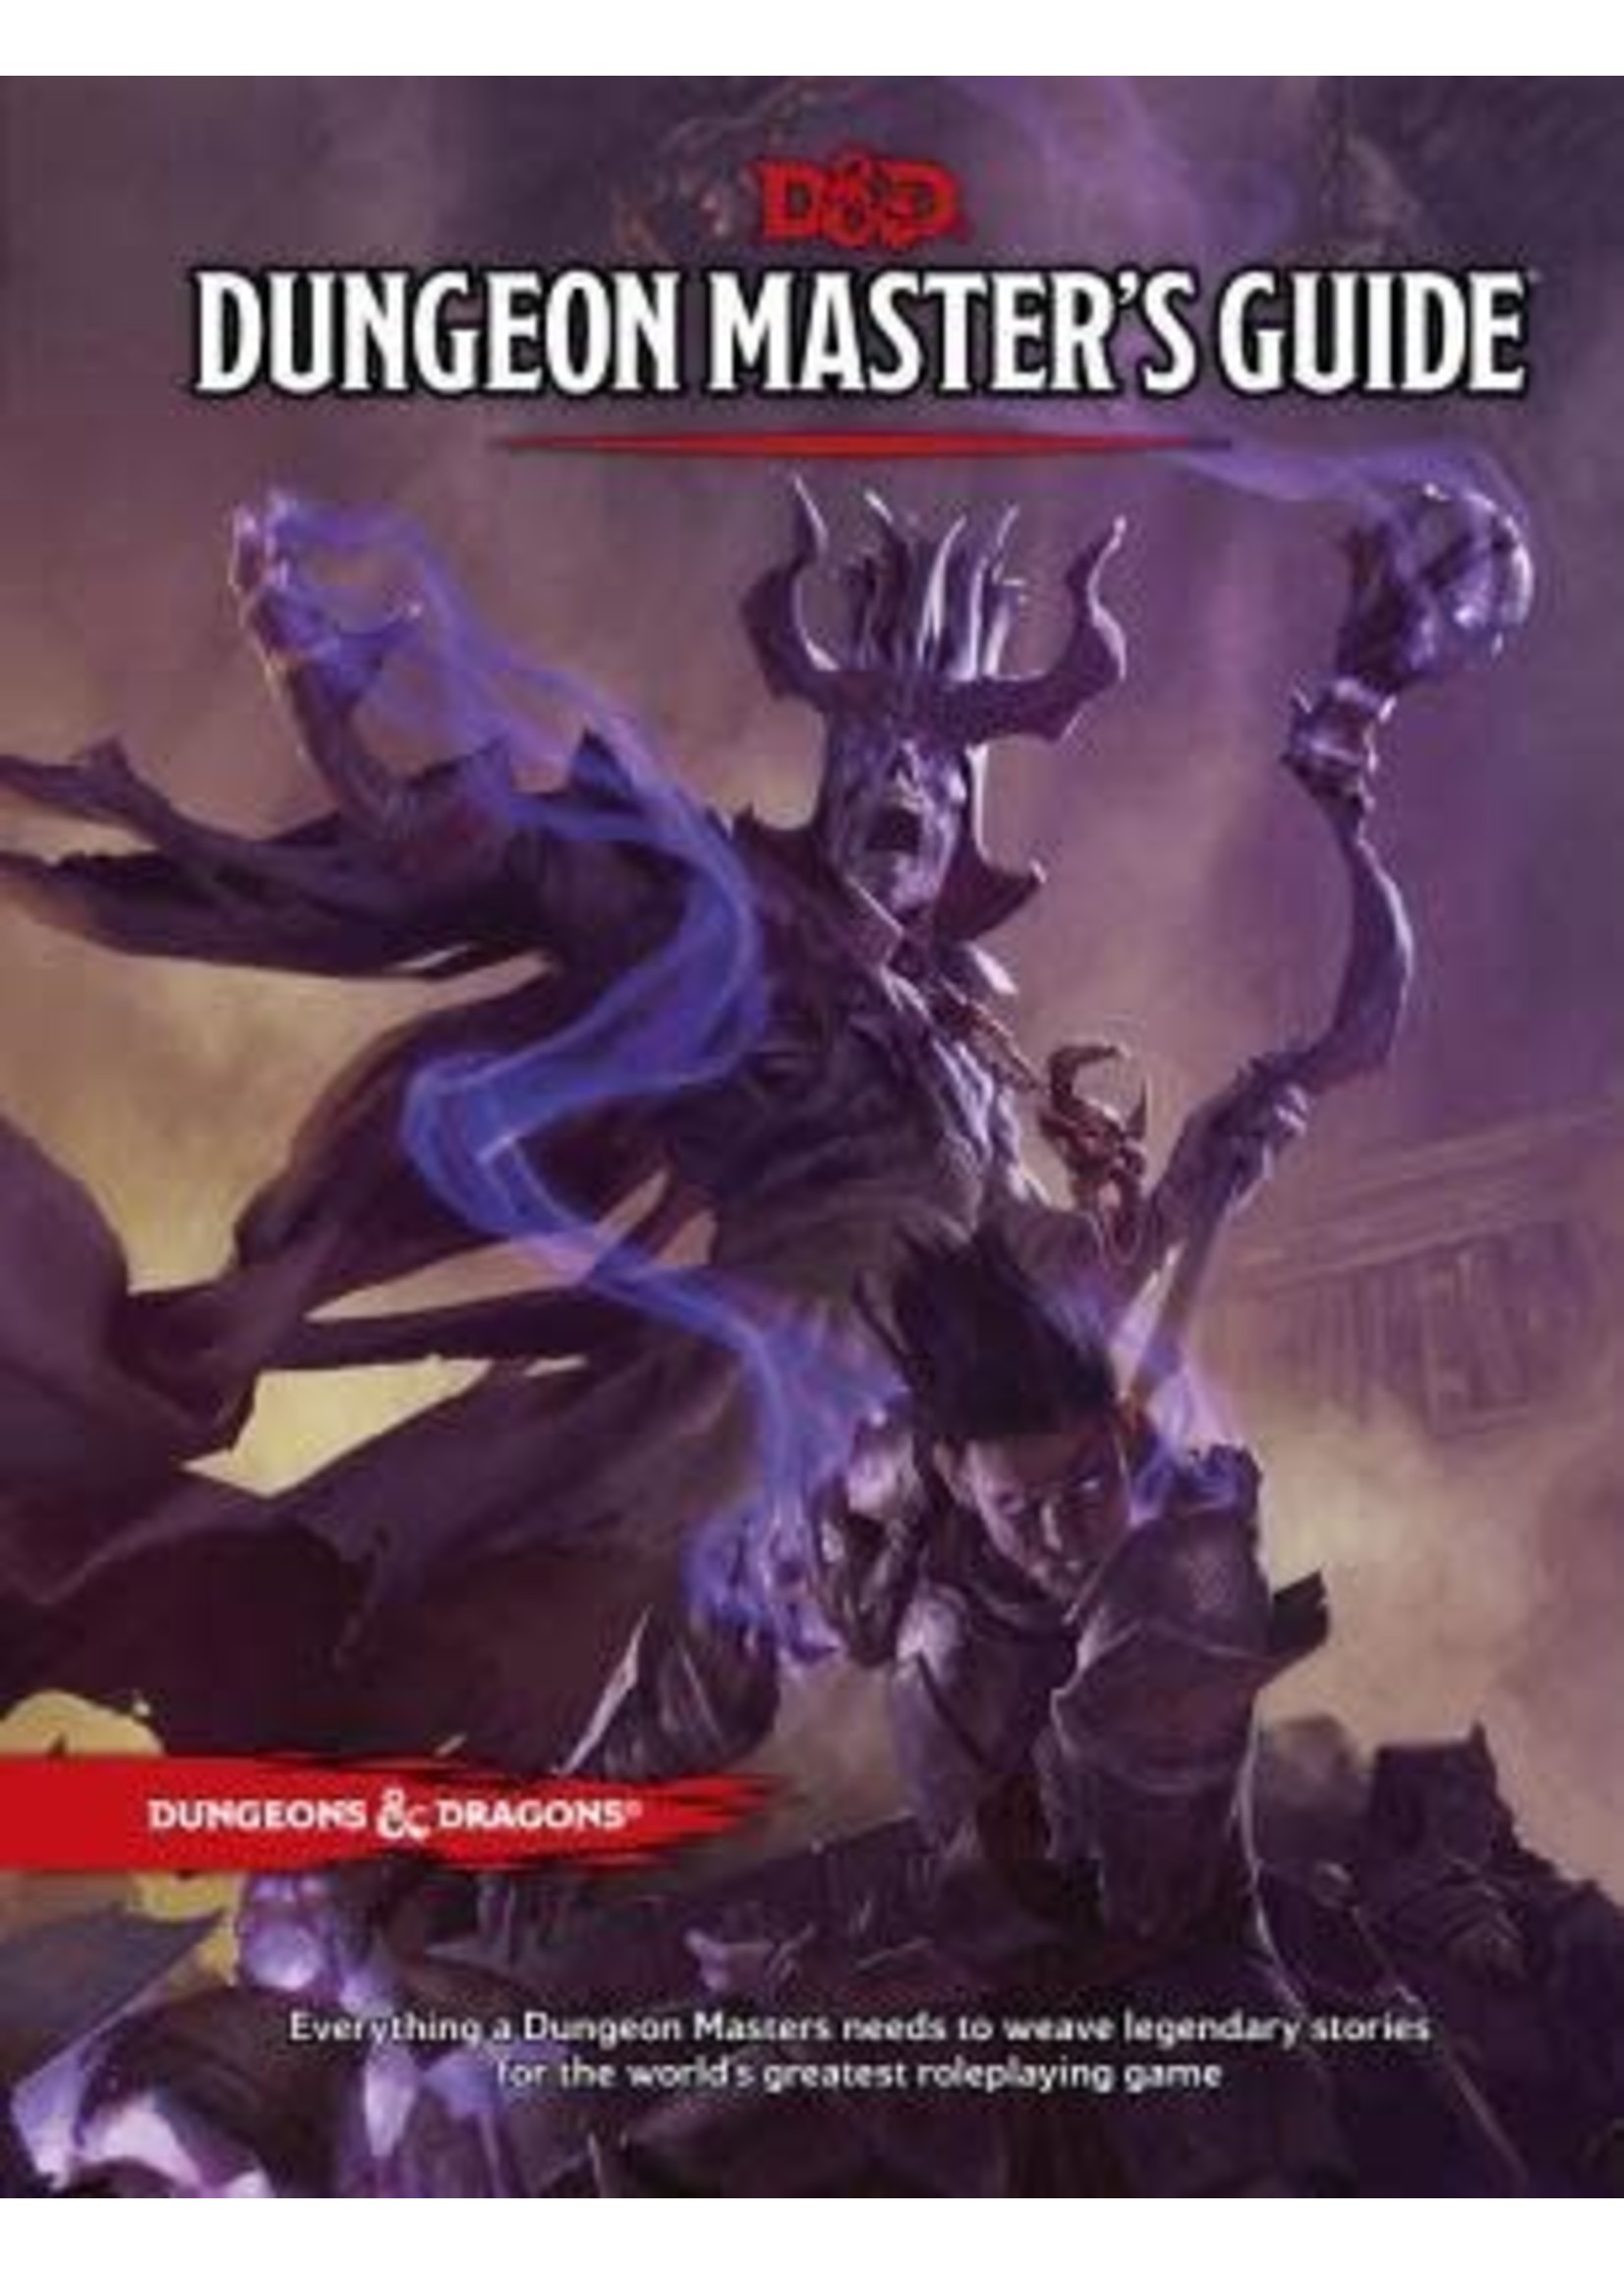 Dungeon Master's Guide (Dungeons & Dragons, 5th Edition) by Wizards of the Coast